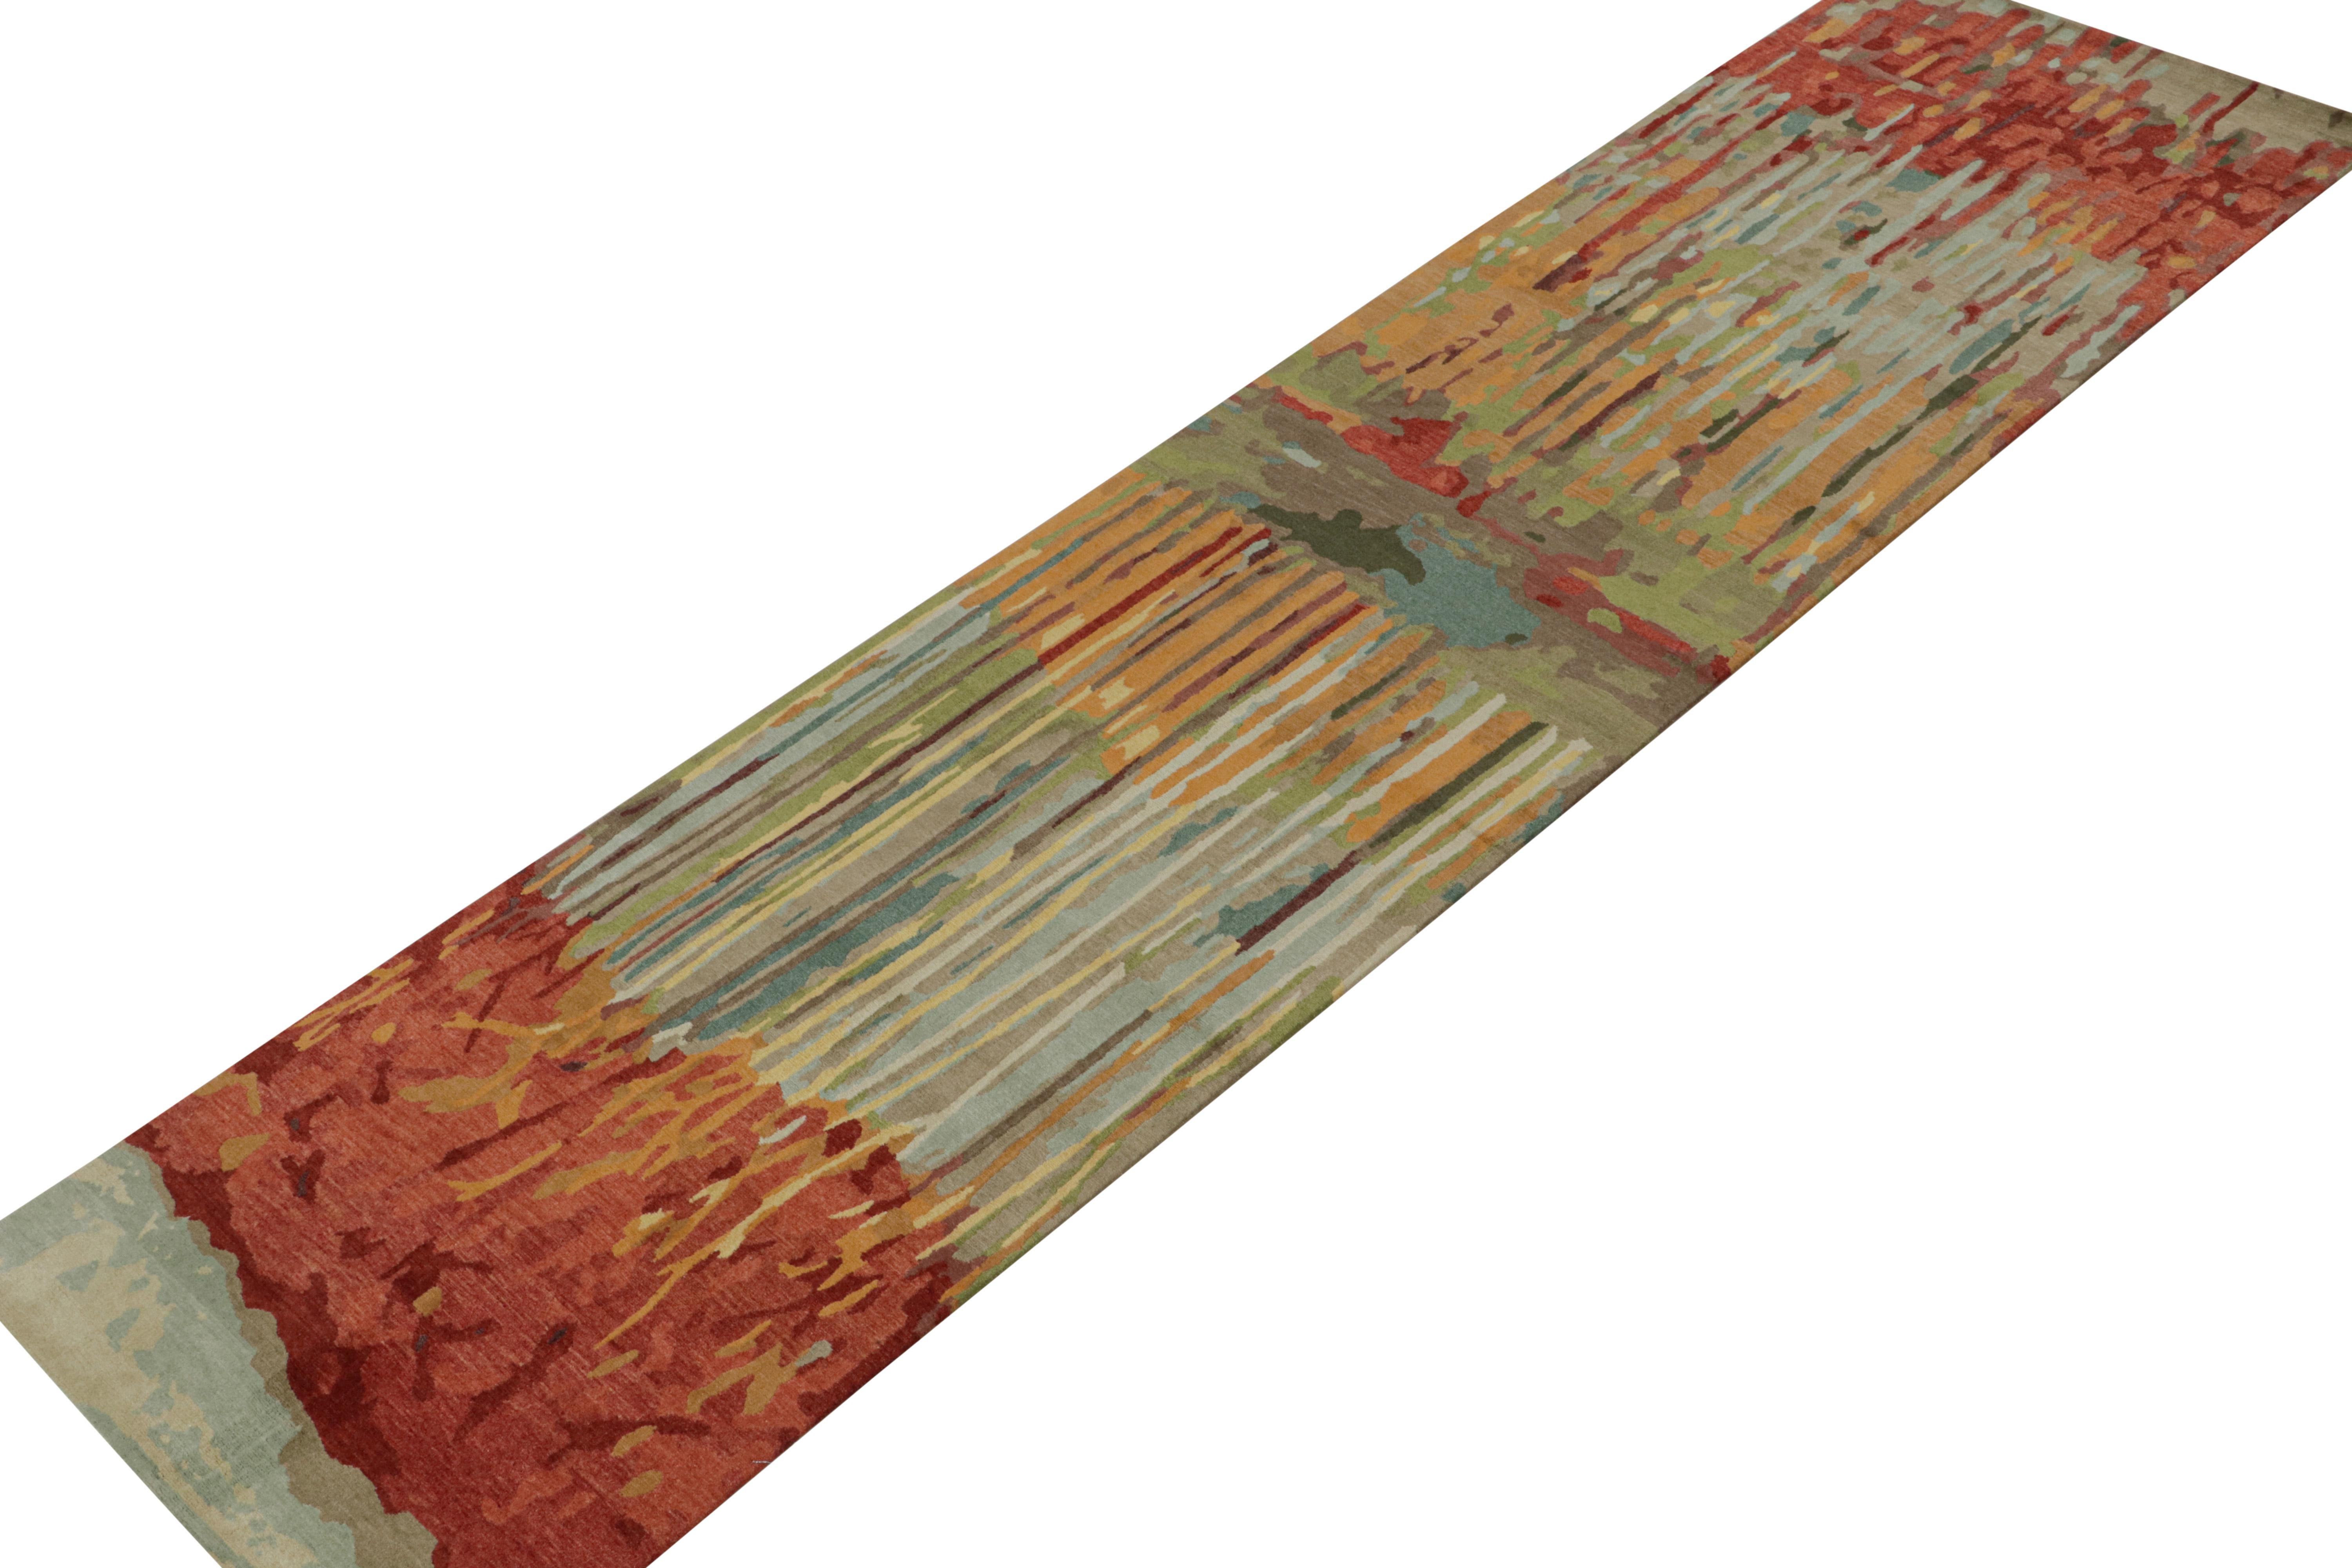 Hand-knotted in wool and silk, this 3x12 abstract runner is a new addition to the Modern Collection by Rug & Kilim.

On the Design:

The rug boasts an expressive & bright persona with vibrant tones of red, blue, green & blue. This exuberant